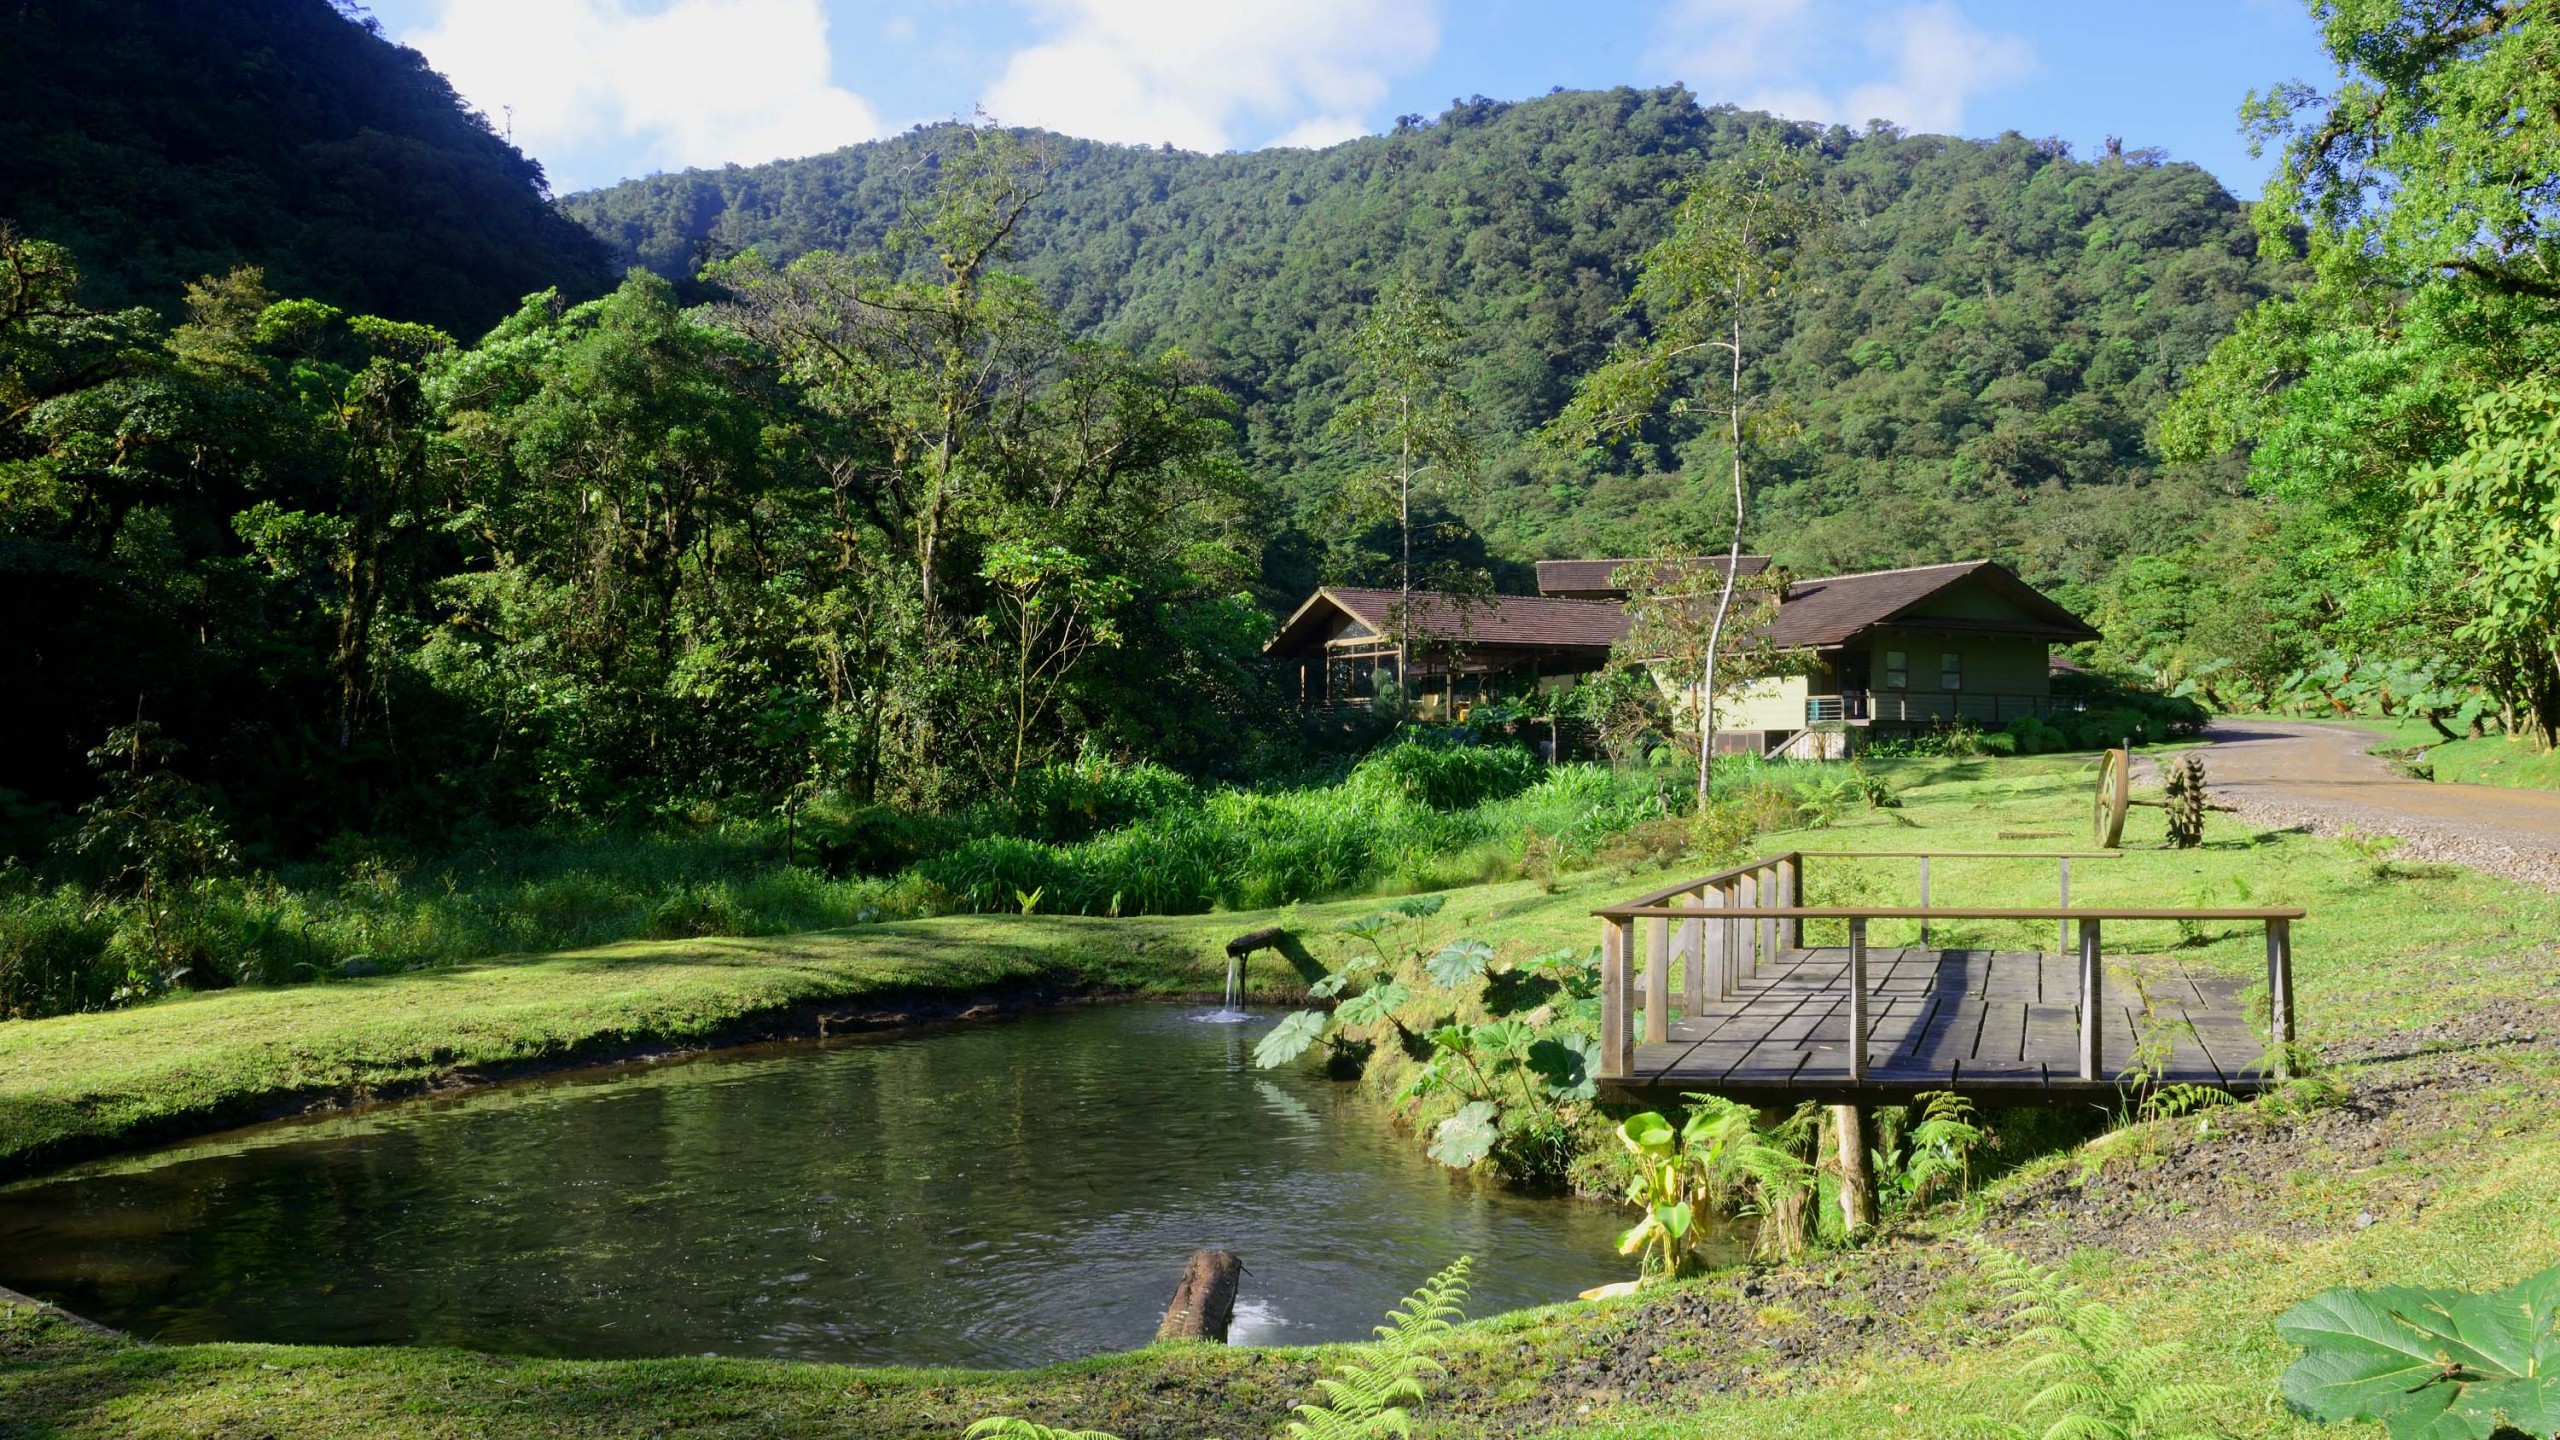 Experience the tranquility of Costa Rica's landscape at El Silencio Lodge & Spa, where serenity and rejuvenation await.